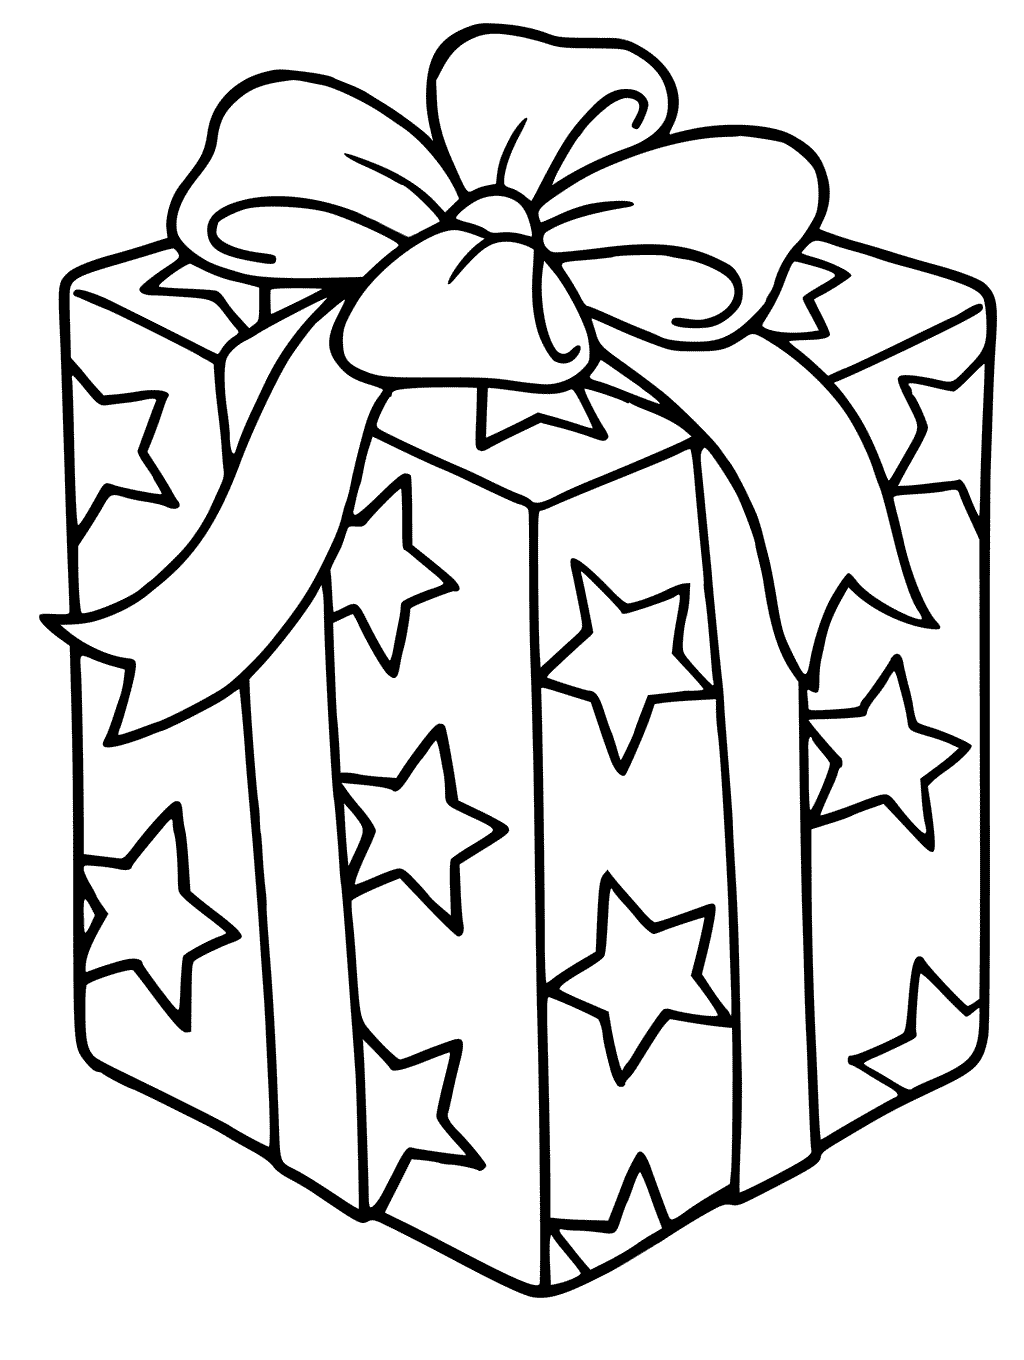 Presents coloring pages